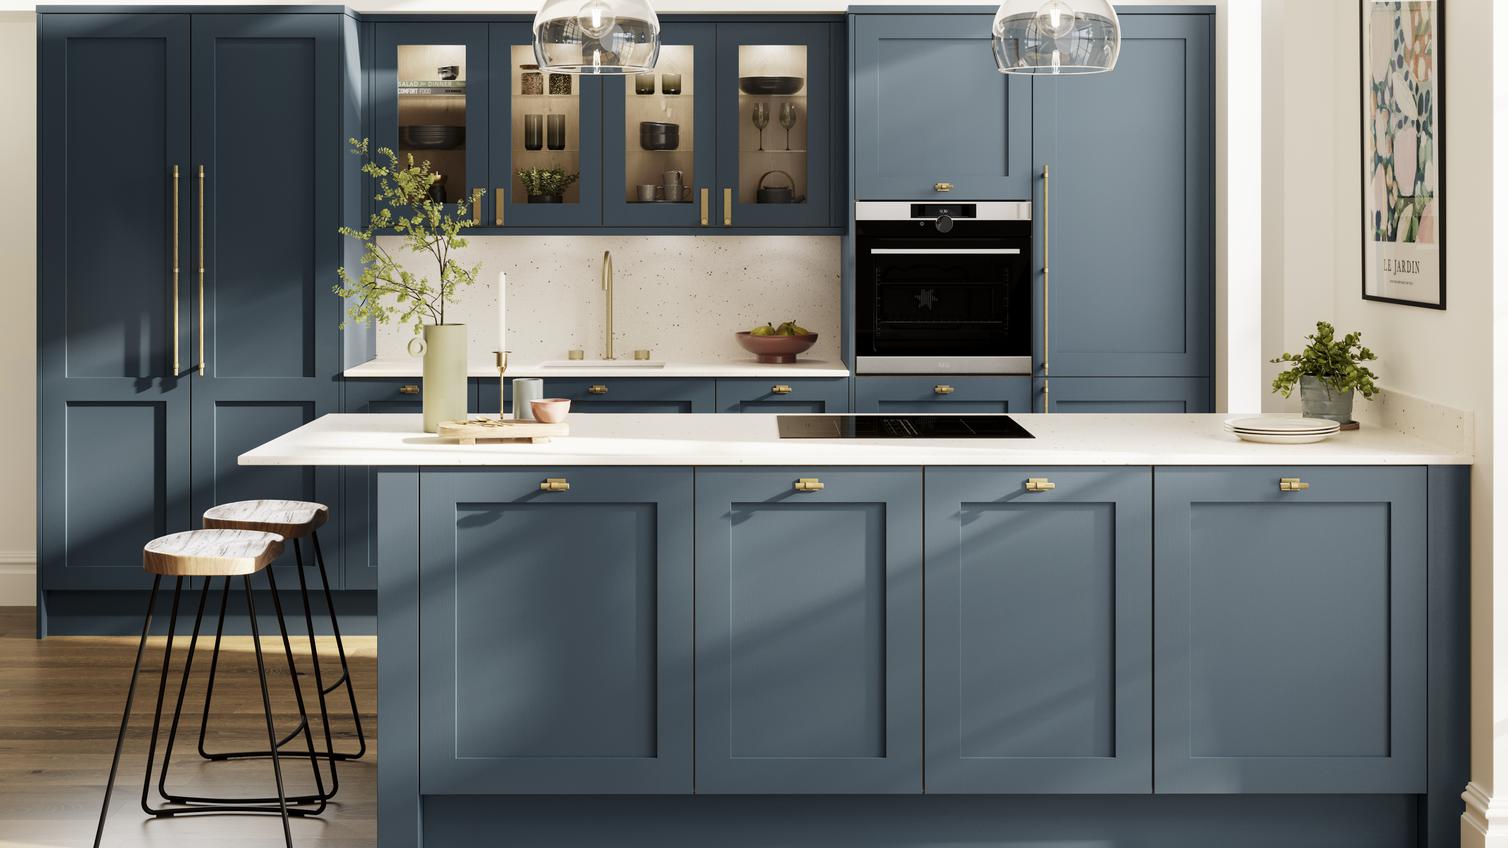 A timeless blue kitchen with shaker cupboard doors, white worktops, wooden floors, and brass knobs in a peninsula layout.